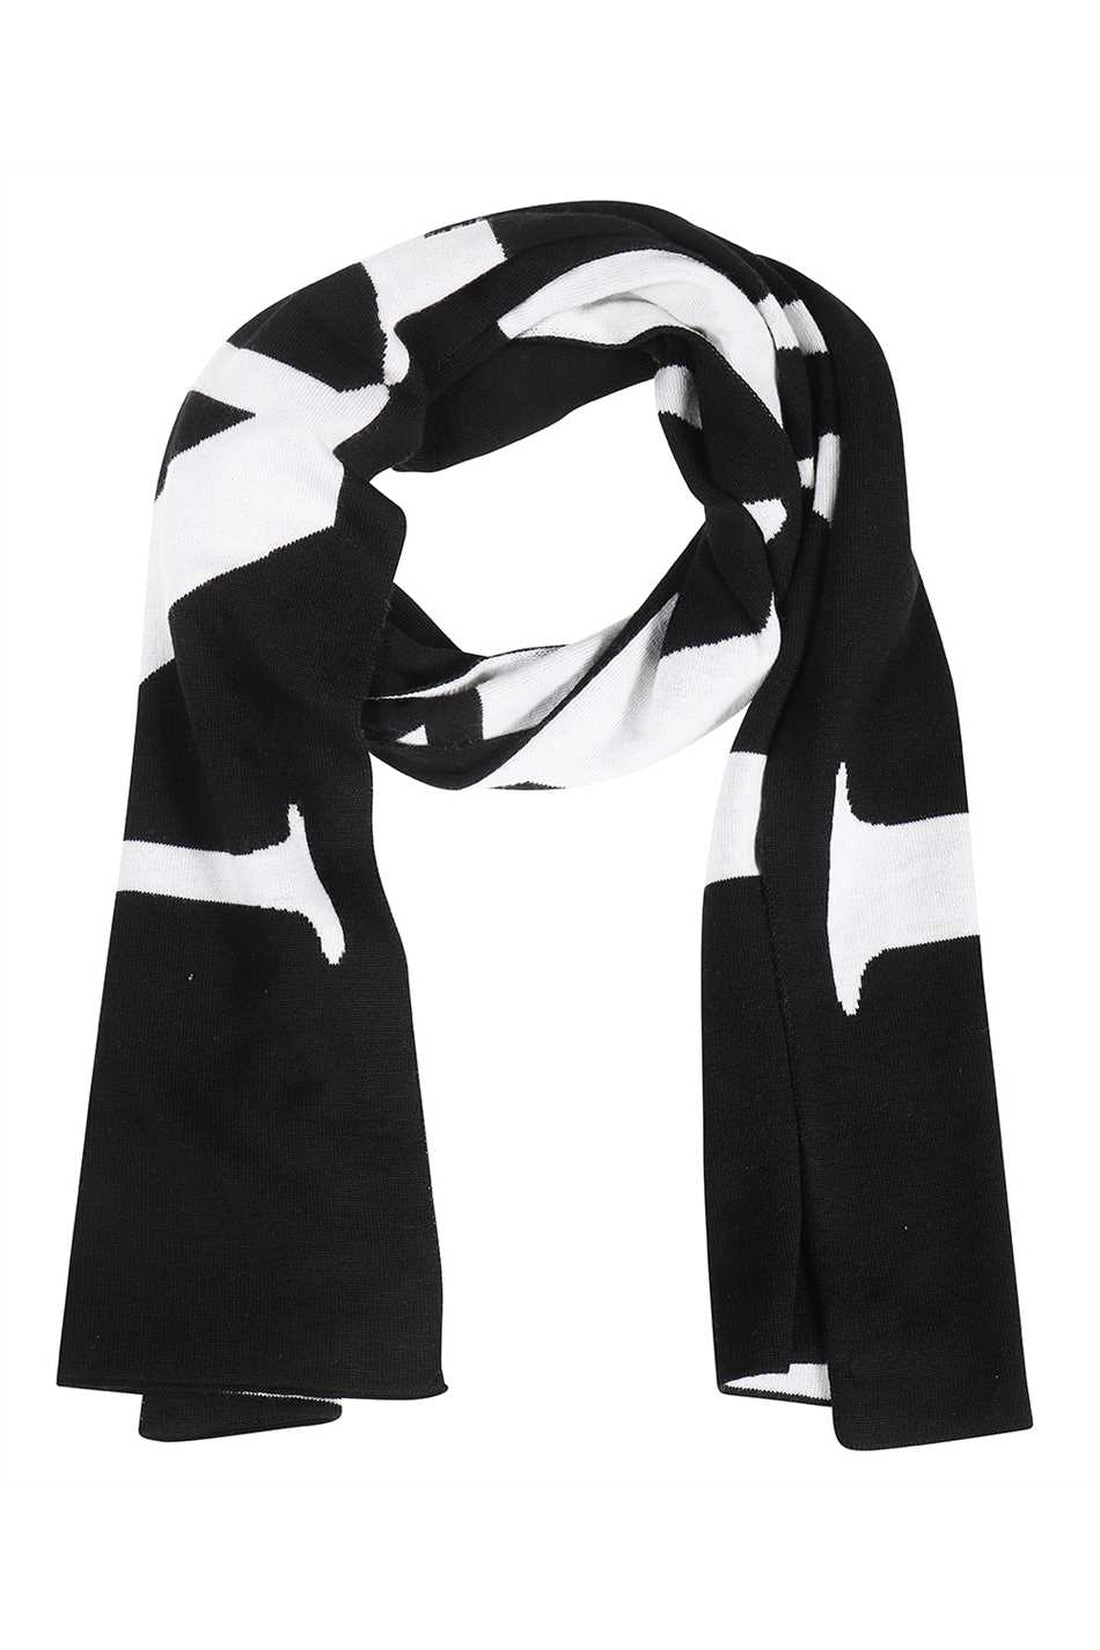 Lanvin-OUTLET-SALE-Logo knitted scarf-ARCHIVIST